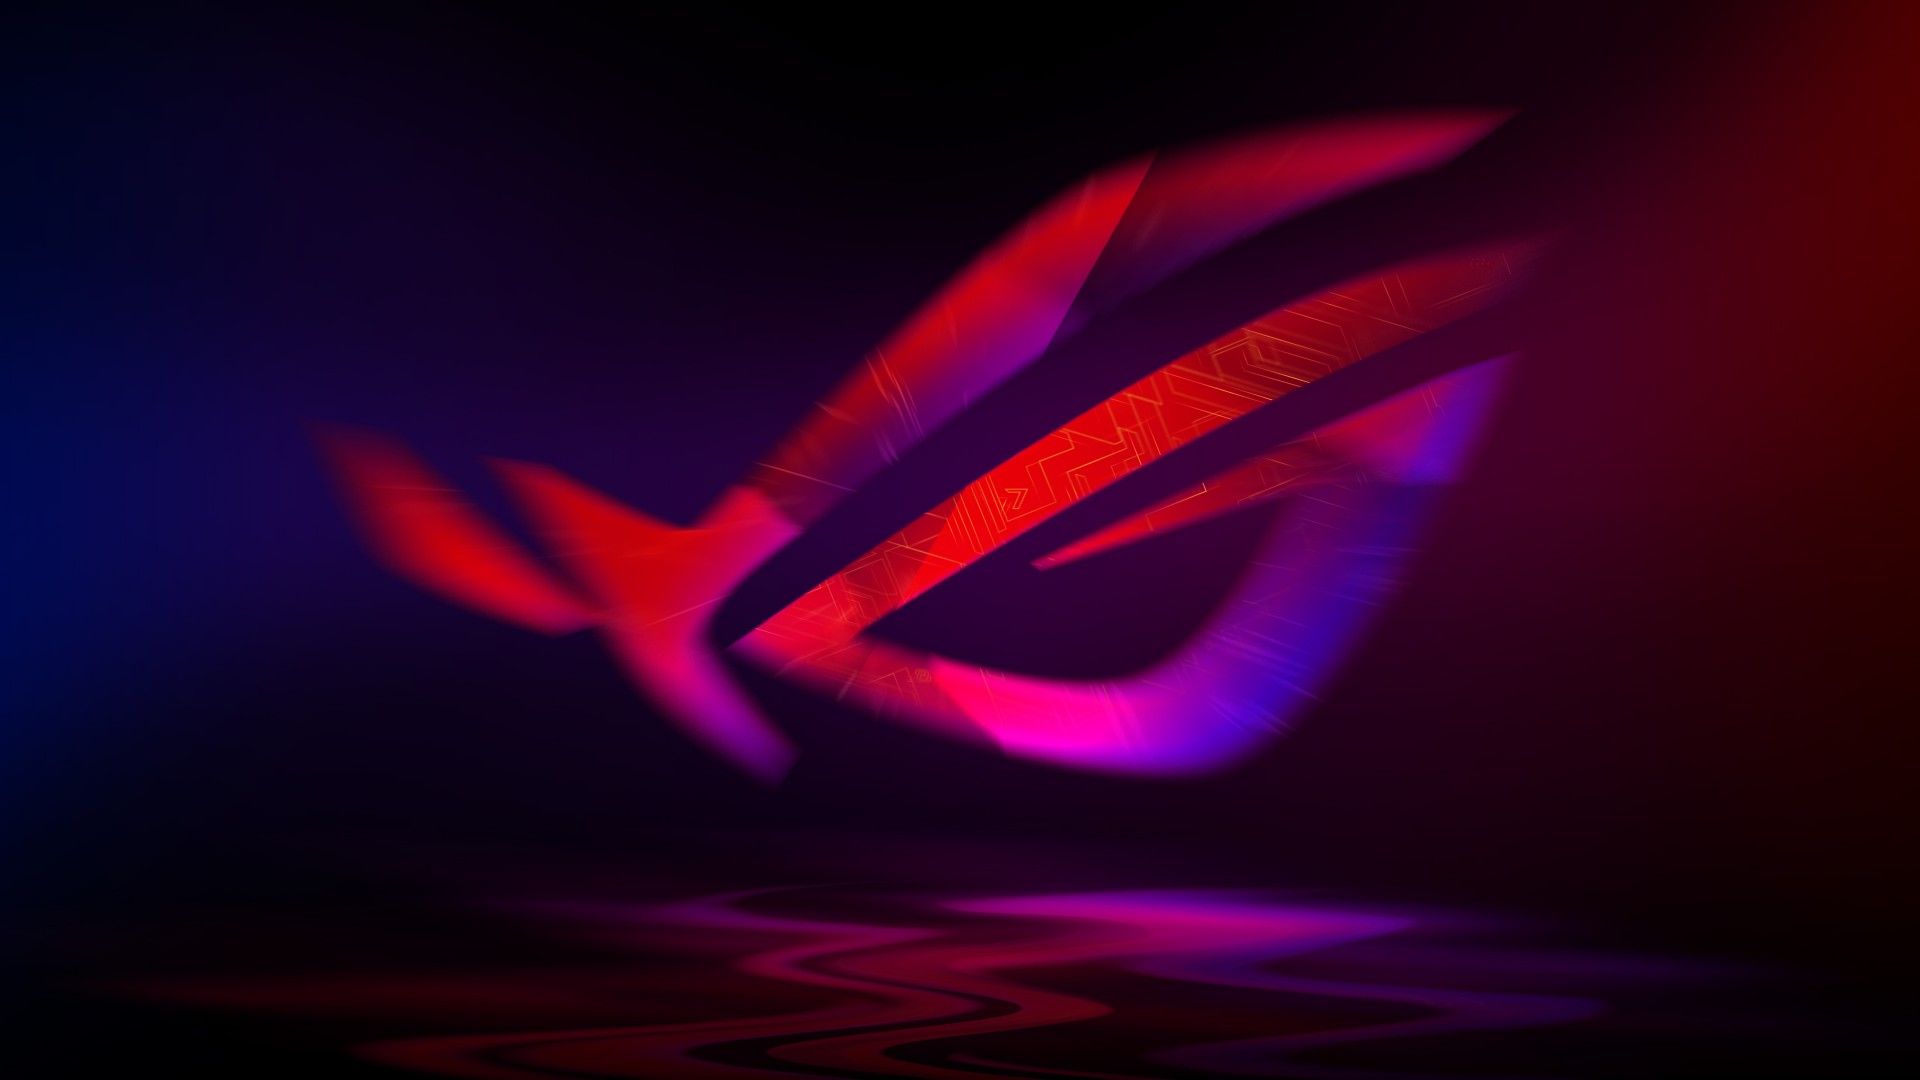 Wallpapers ASUS ROG, Neon, 4K, Technology,